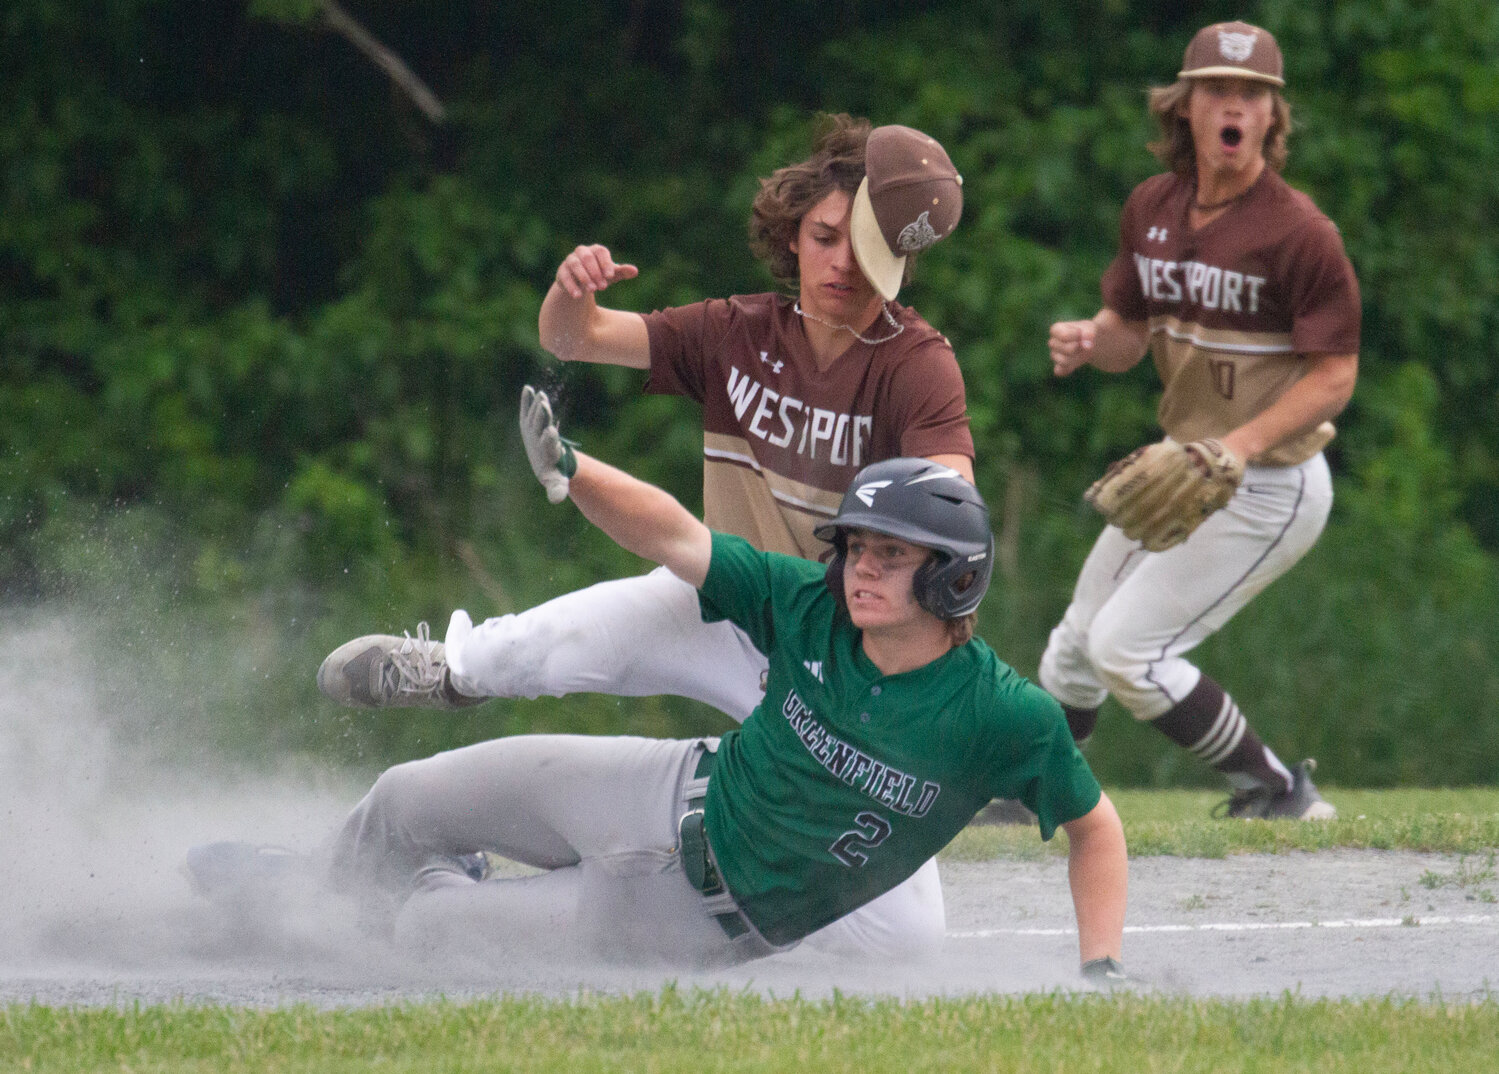 Third baseman Vaughn Costa tags out Greenfield baserunner Mike Pierce to complete a 5-3-5 double play in the fourth inning during the Wildcats' 4-2 loss to Greenfield in the Round of 16 on Wednesday.